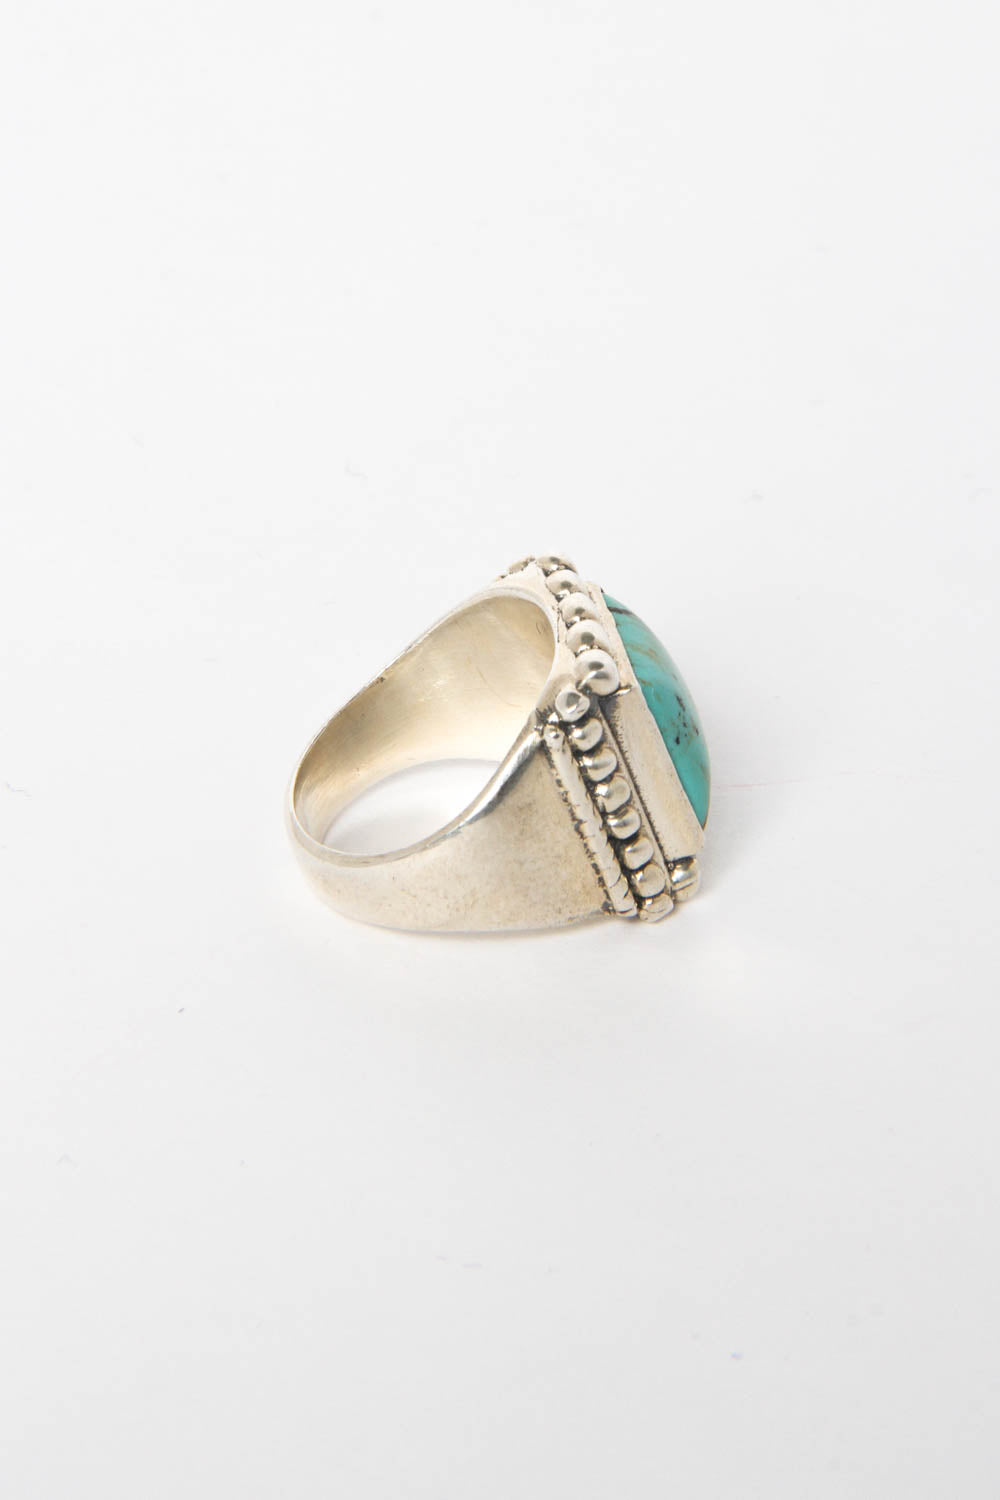 Women's Turquoise Marquee Ring Size 7